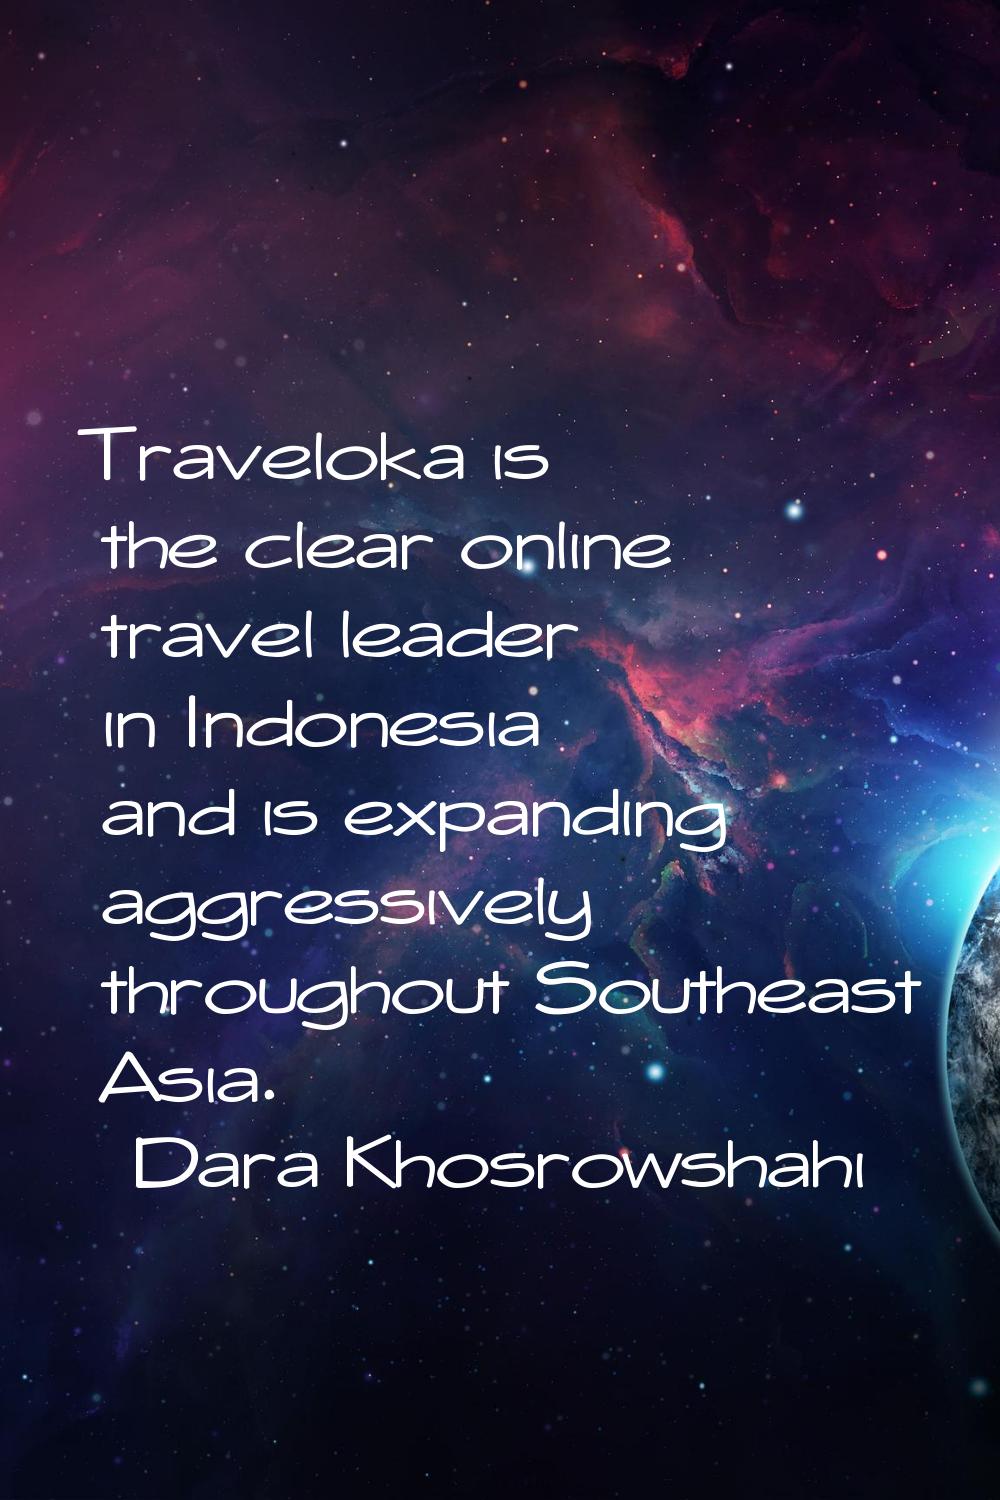 Traveloka is the clear online travel leader in Indonesia and is expanding aggressively throughout S